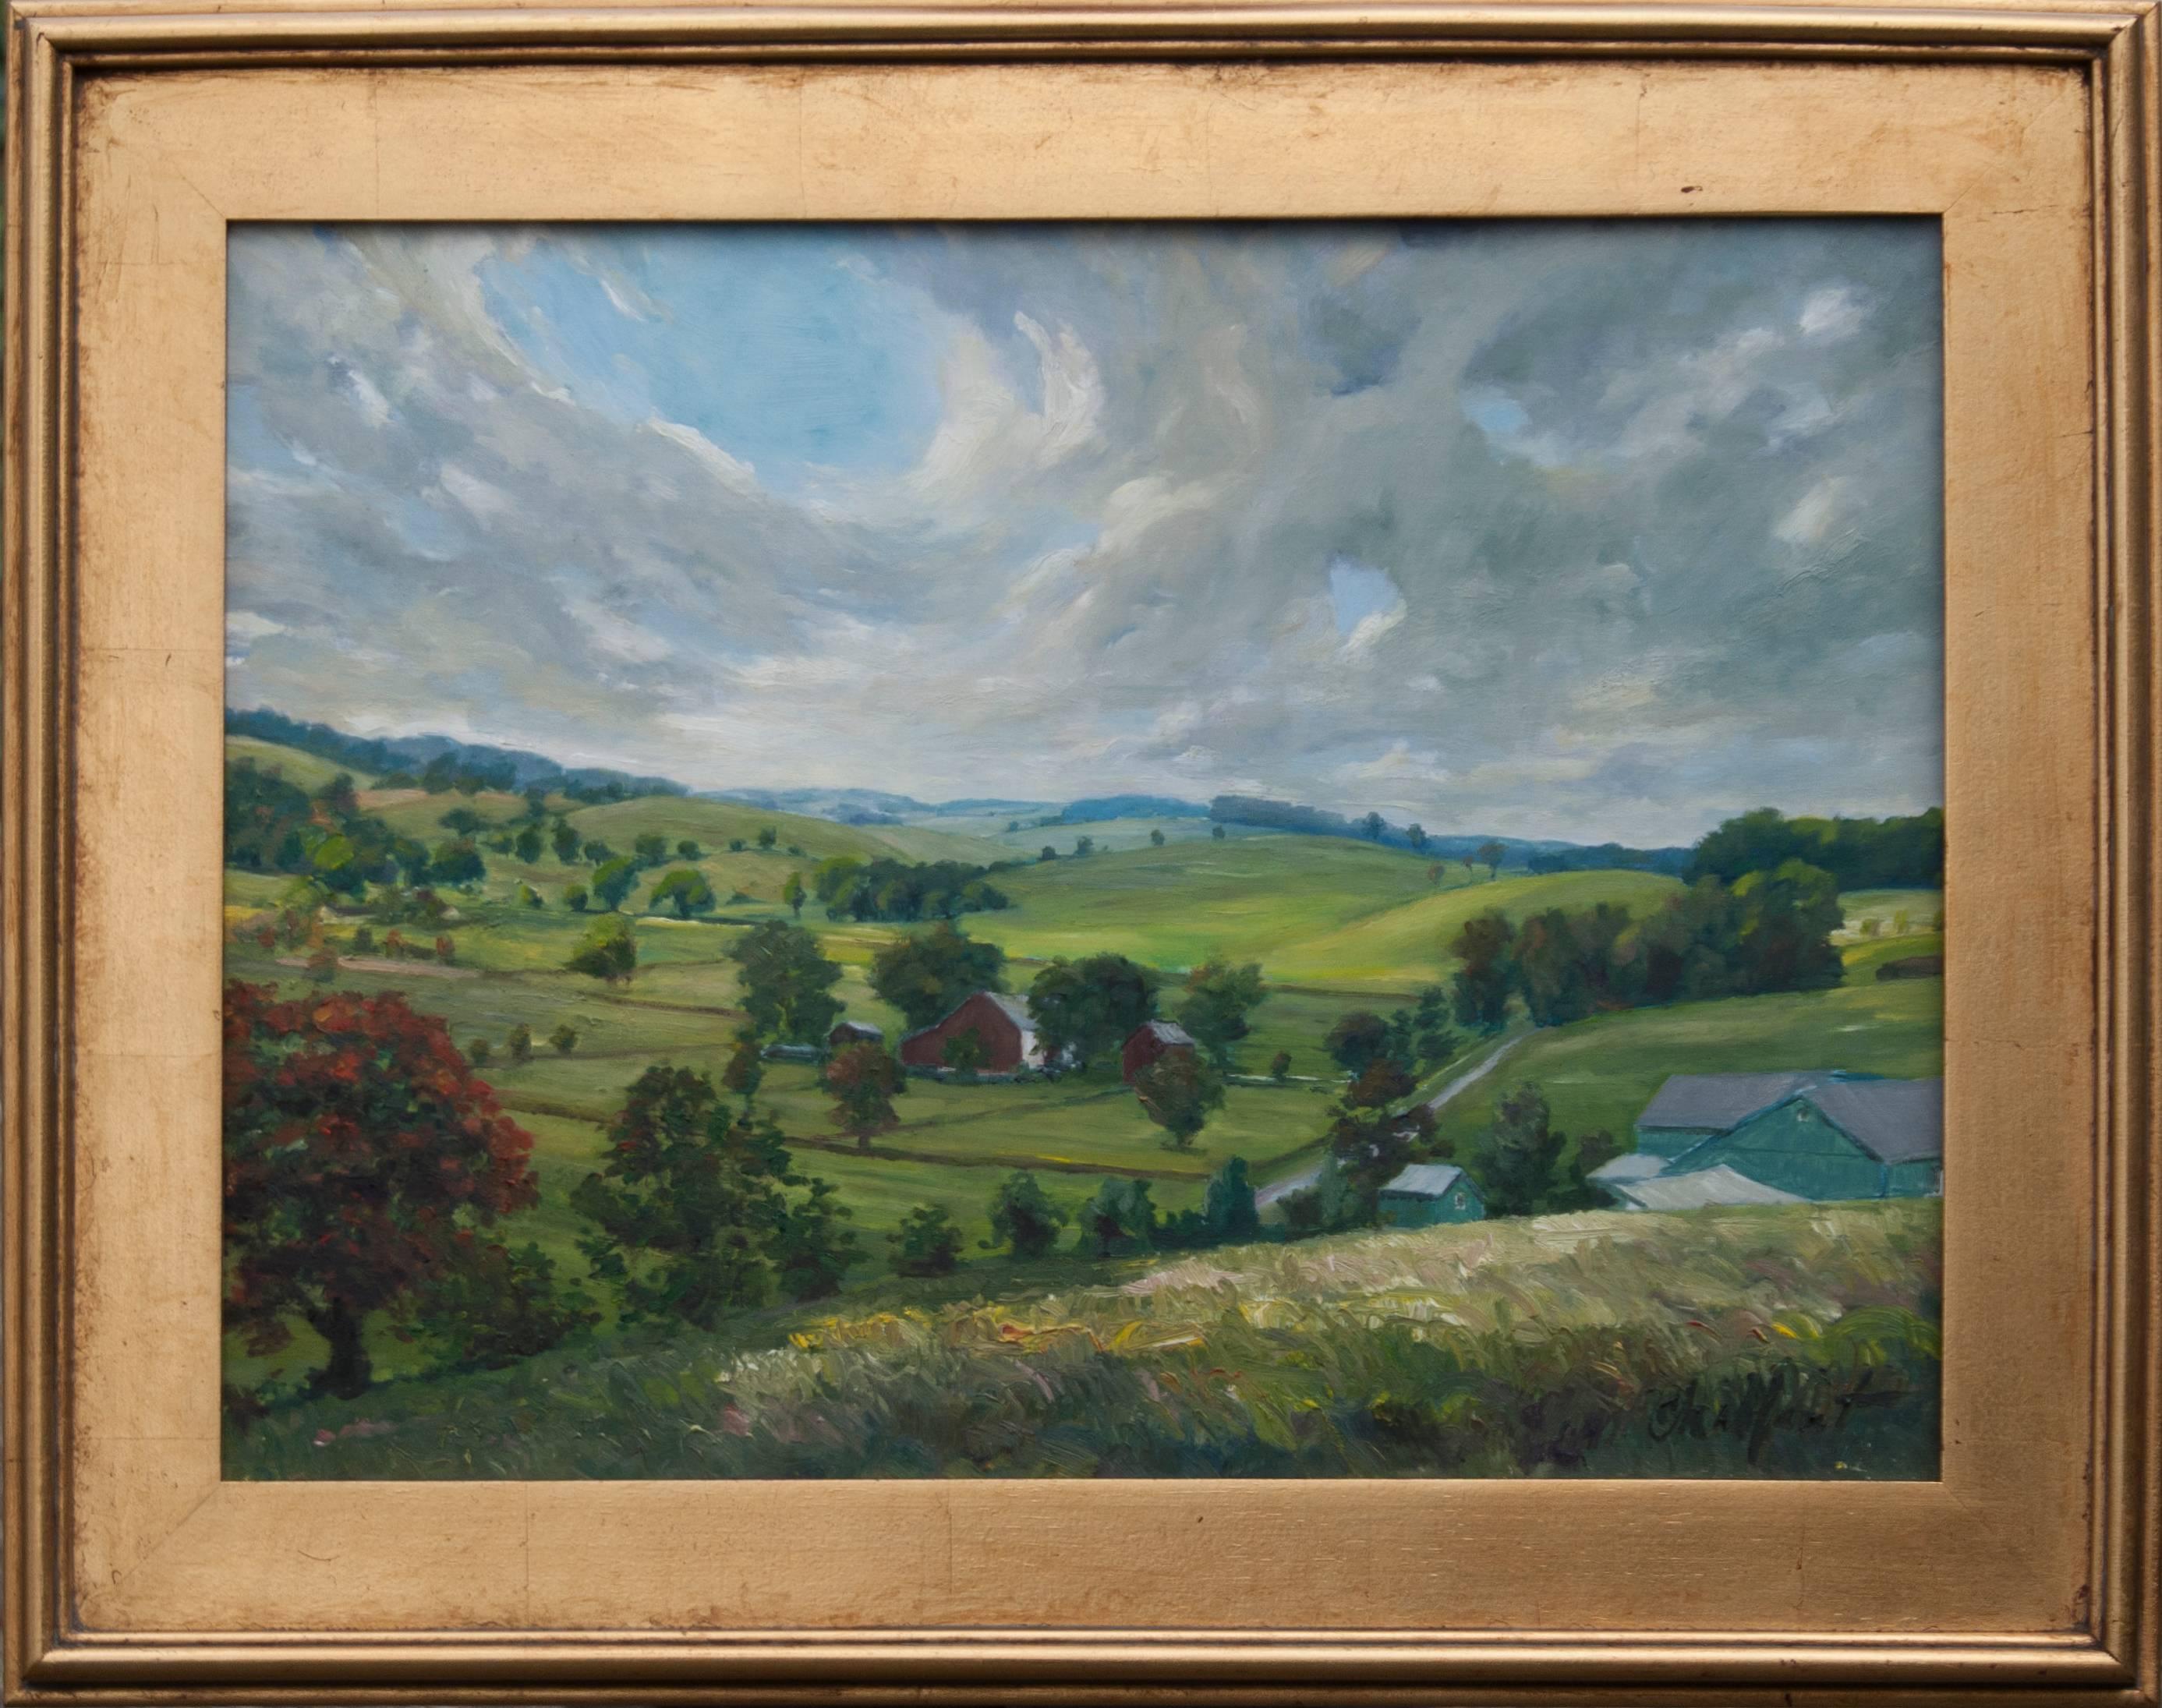 This piece was initiated for a plein air event in early fall. The weather is the story with high winds, rain, thunder and lighting which finally chased me to cover. I had to return in similar conditions to finish at a later date.